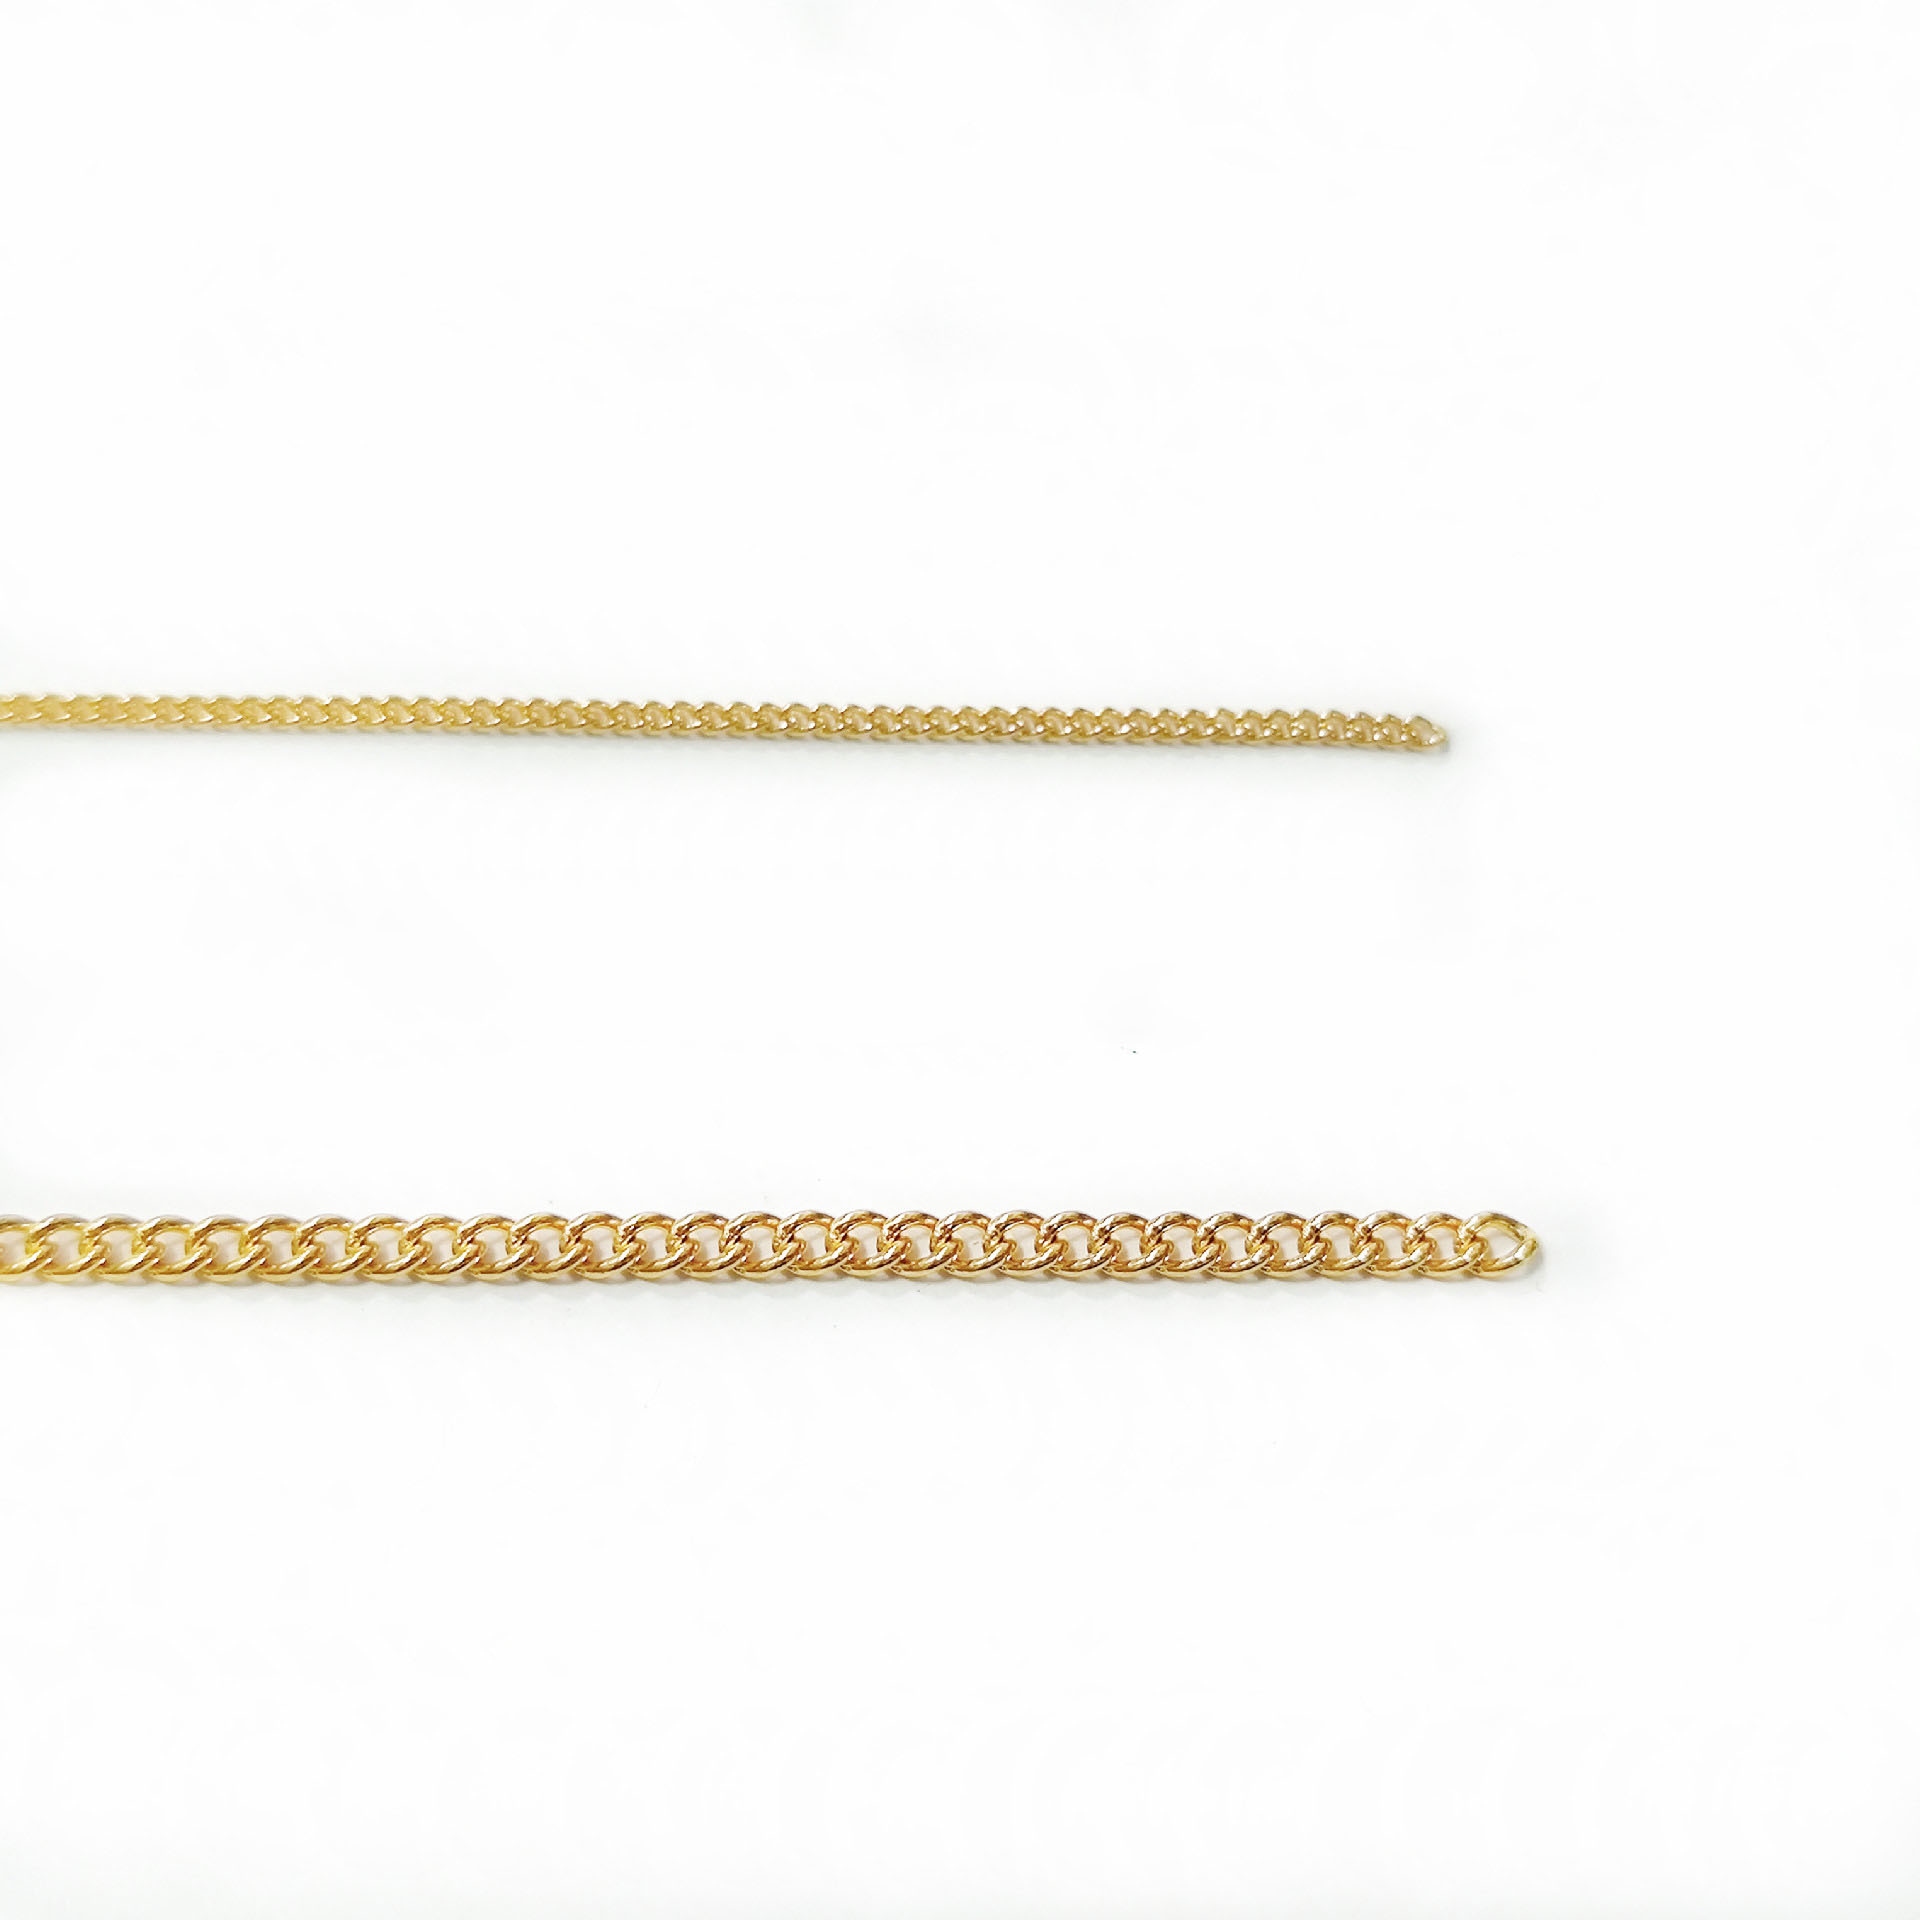 7:0.4 line*chain width 1.5mm gold